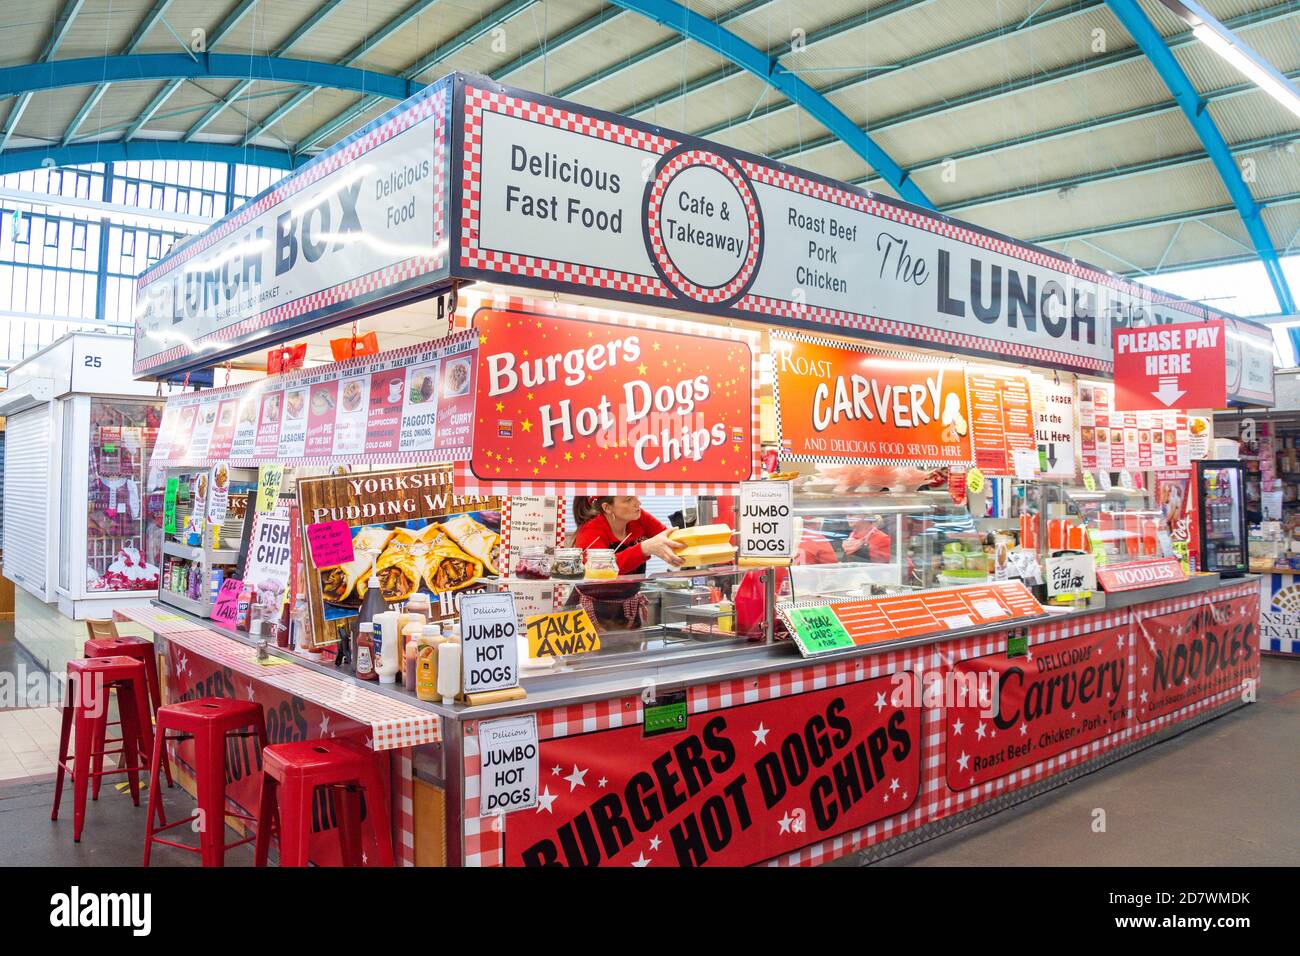 The Lunch Box cafe & take away Kiosk, Swansea Indoor Market, Oxford Street, Swansea (Abertawe), City and County of Swansea, Galles, Regno Unito Foto Stock